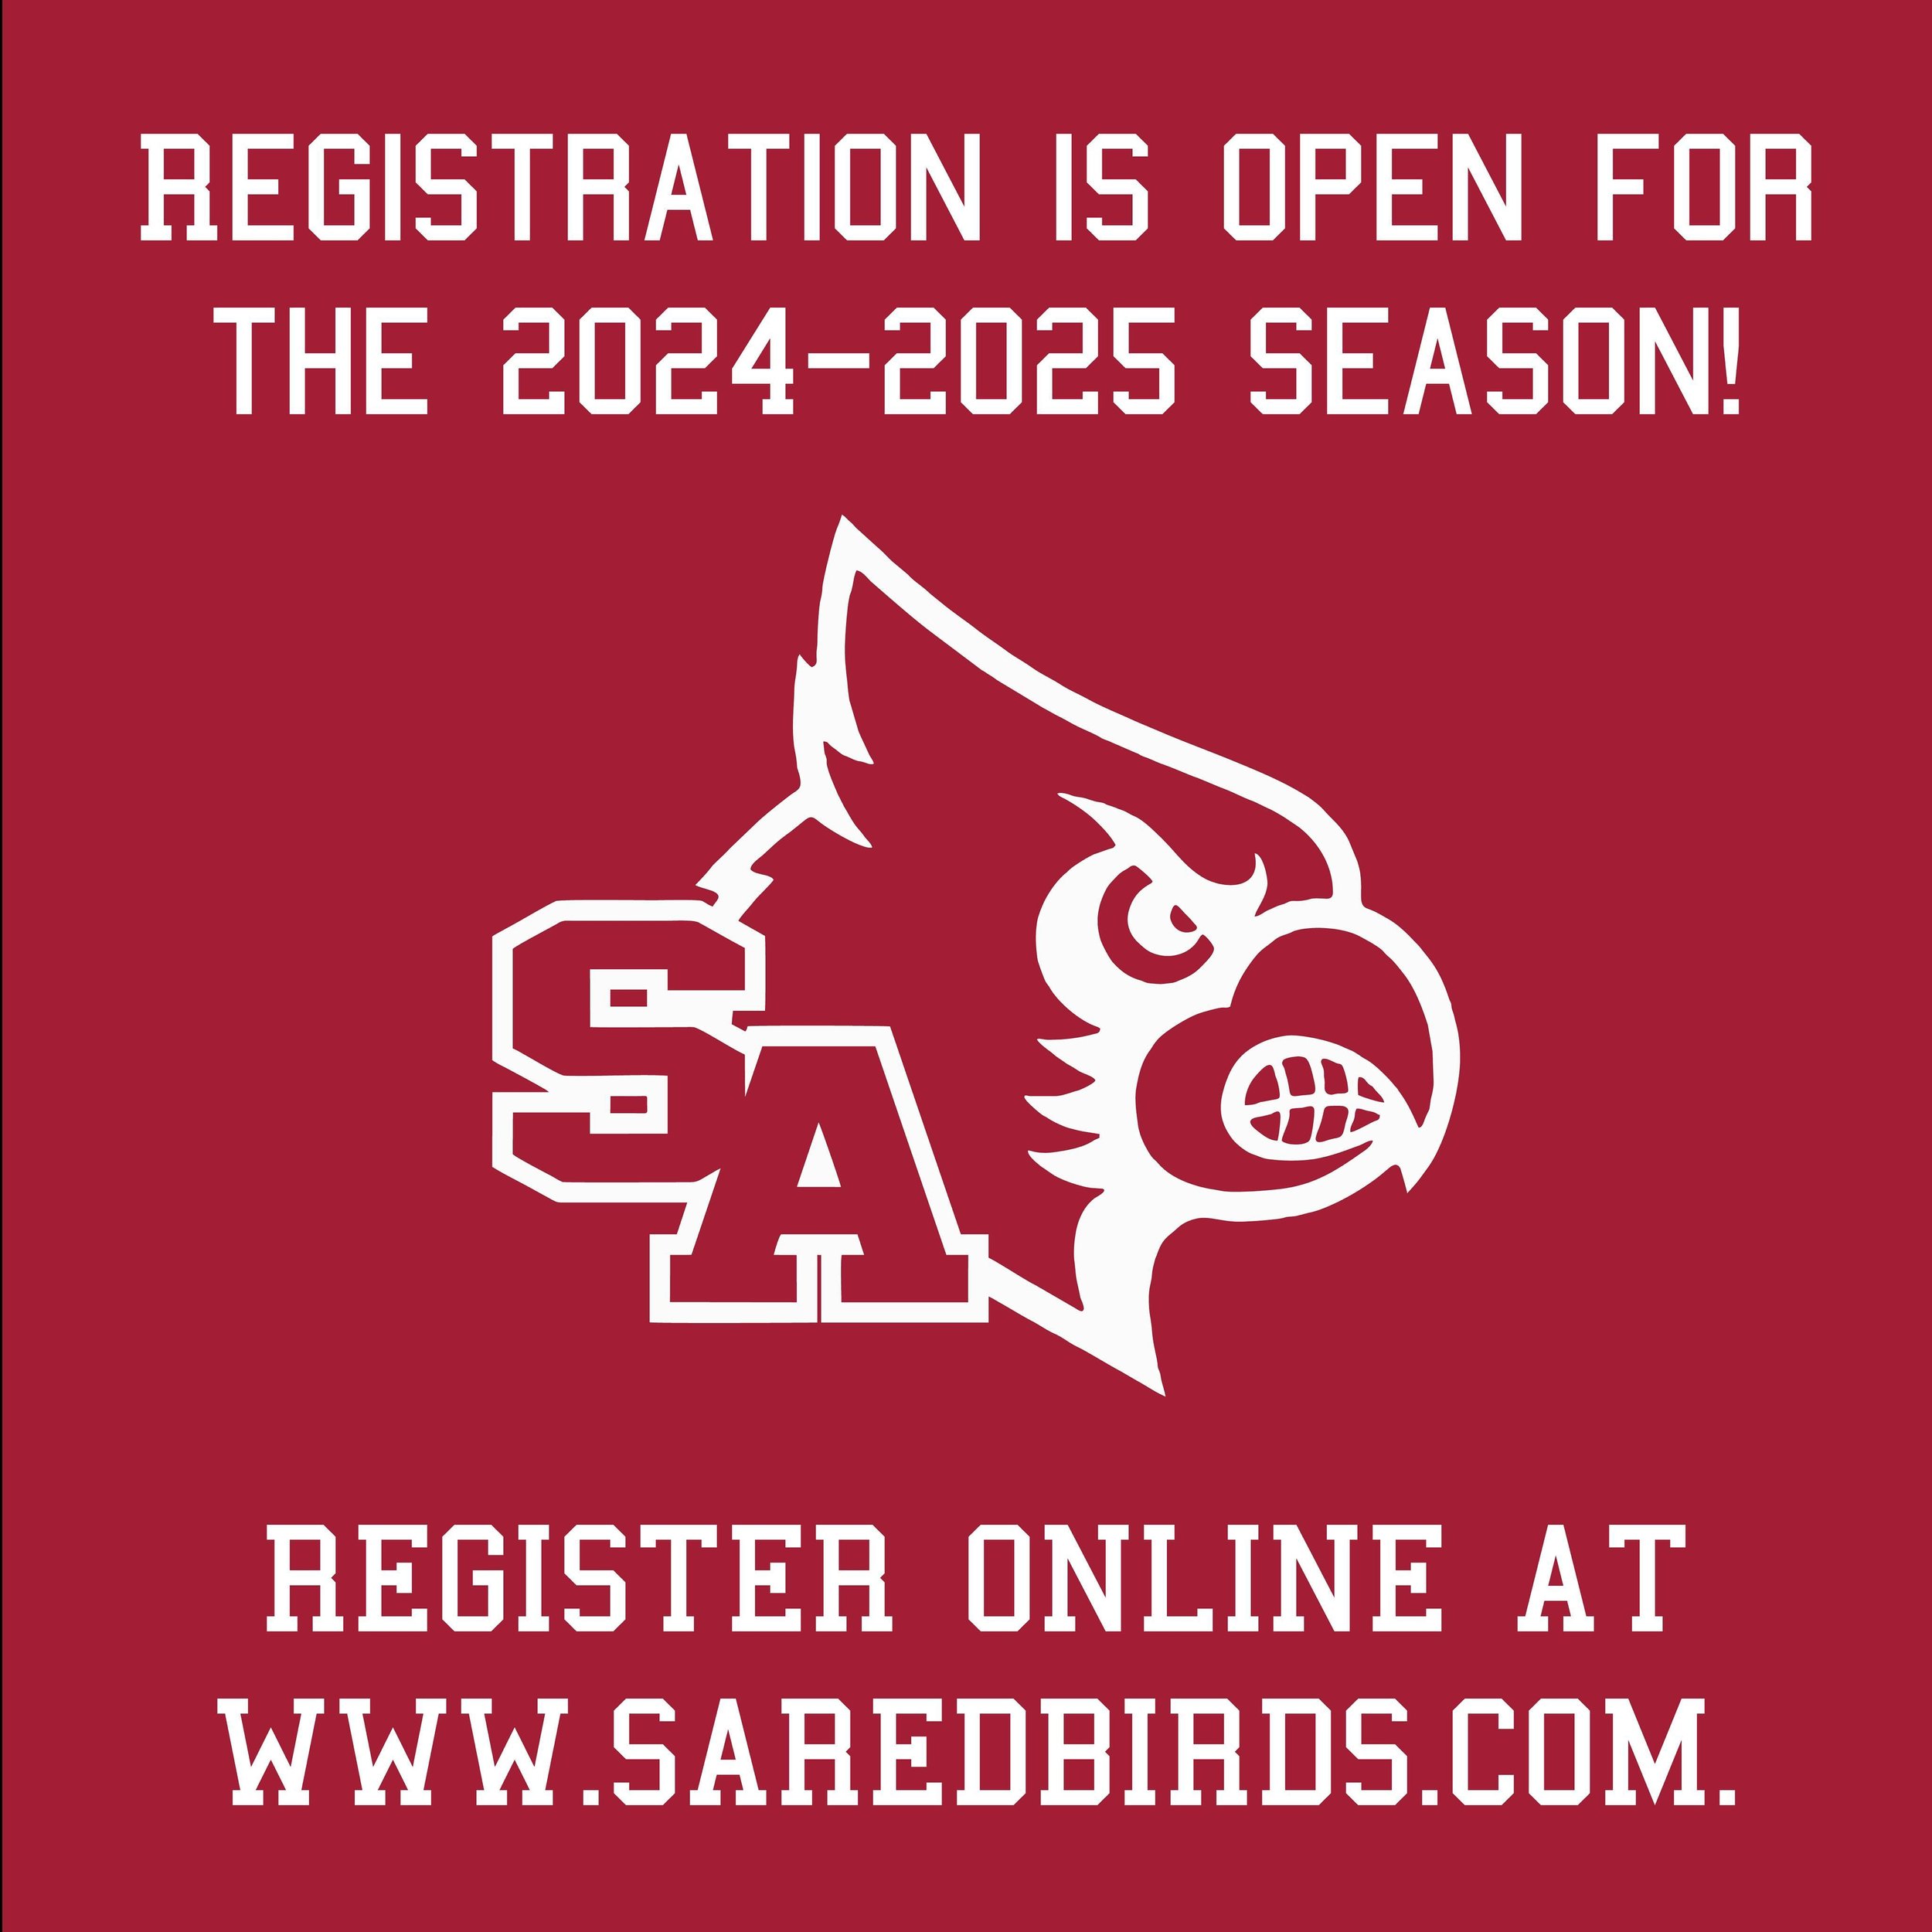 Registration for the 2024-2025 season is now open! Registration forms are due by May 19, 2024 in order for your child to be eligible for the 2024-2025 season. Tryouts will take place on May 19, 2024. More details regarding tryouts coming soon. #sared